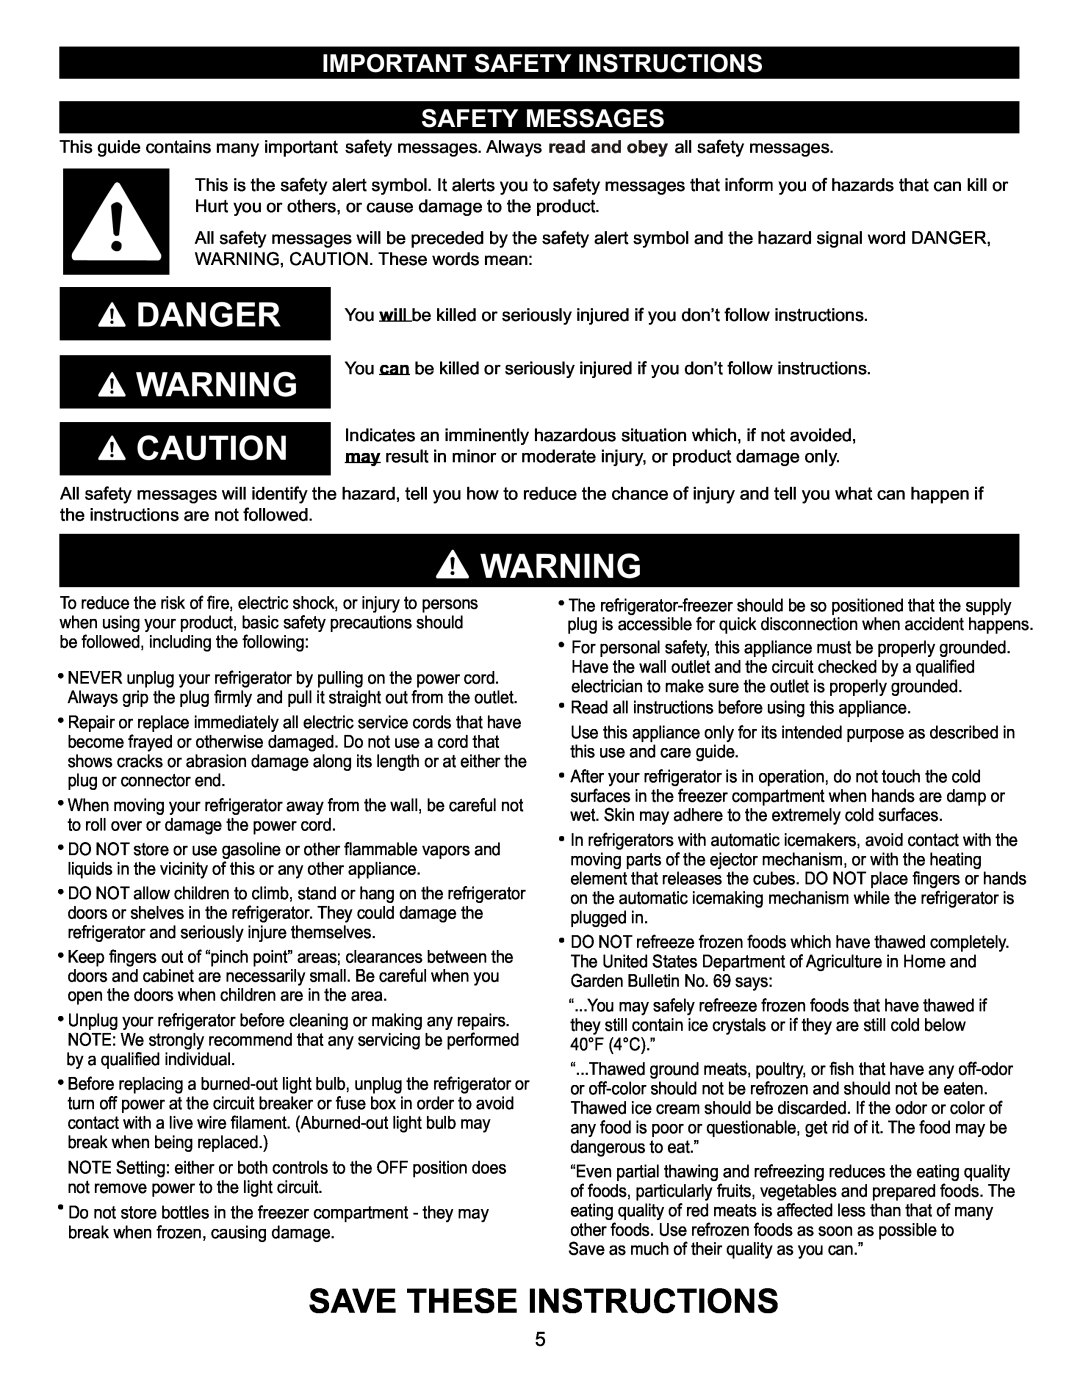 LG Electronics LFC23760 owner manual Danger, Important Safety Instructions Safety Messages, Save These Instructions 